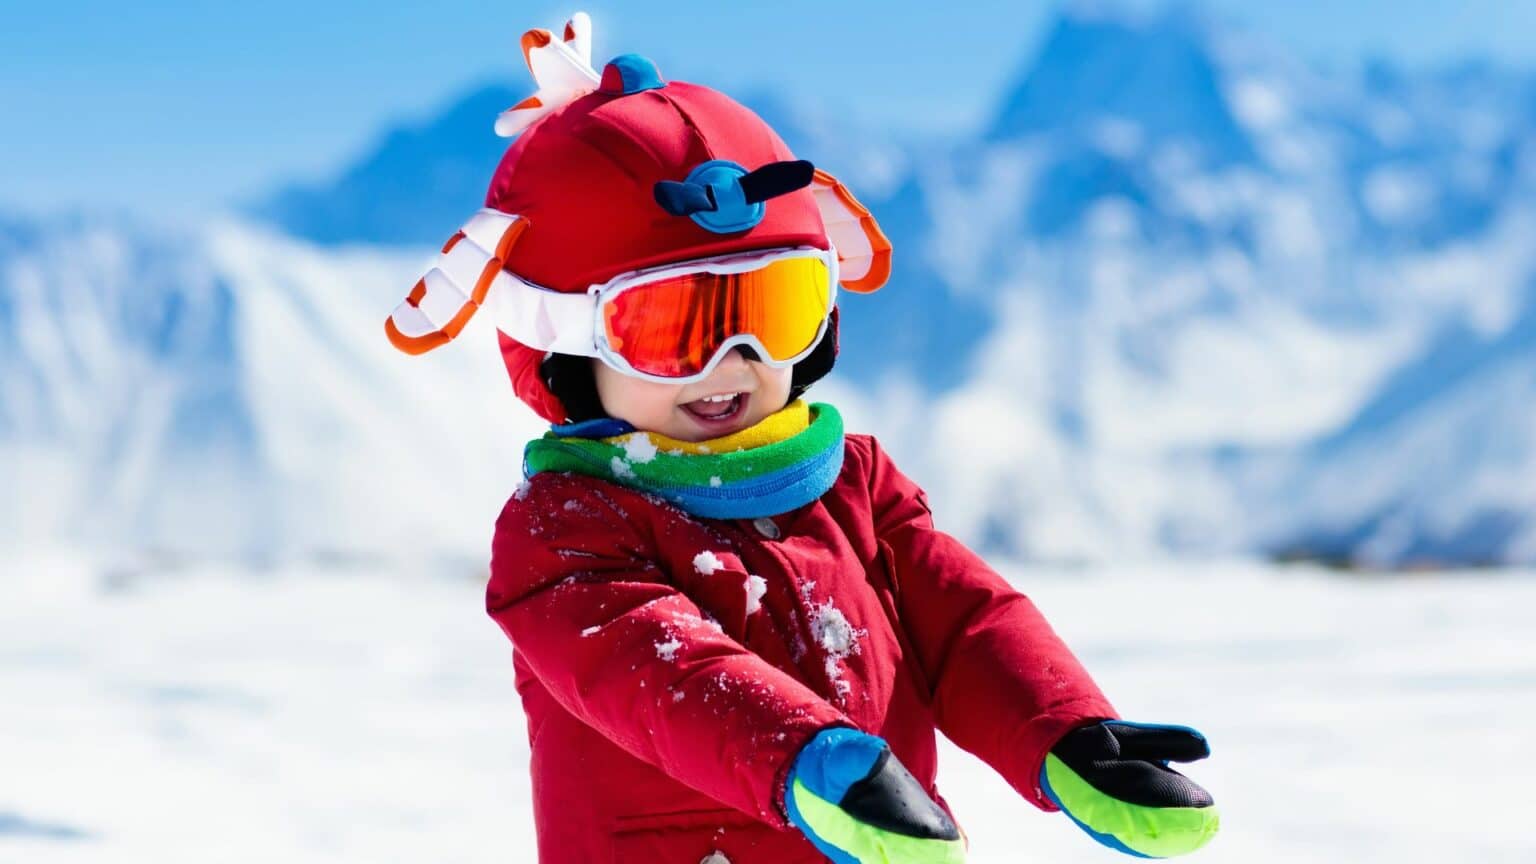 Is it safe to ski as a child